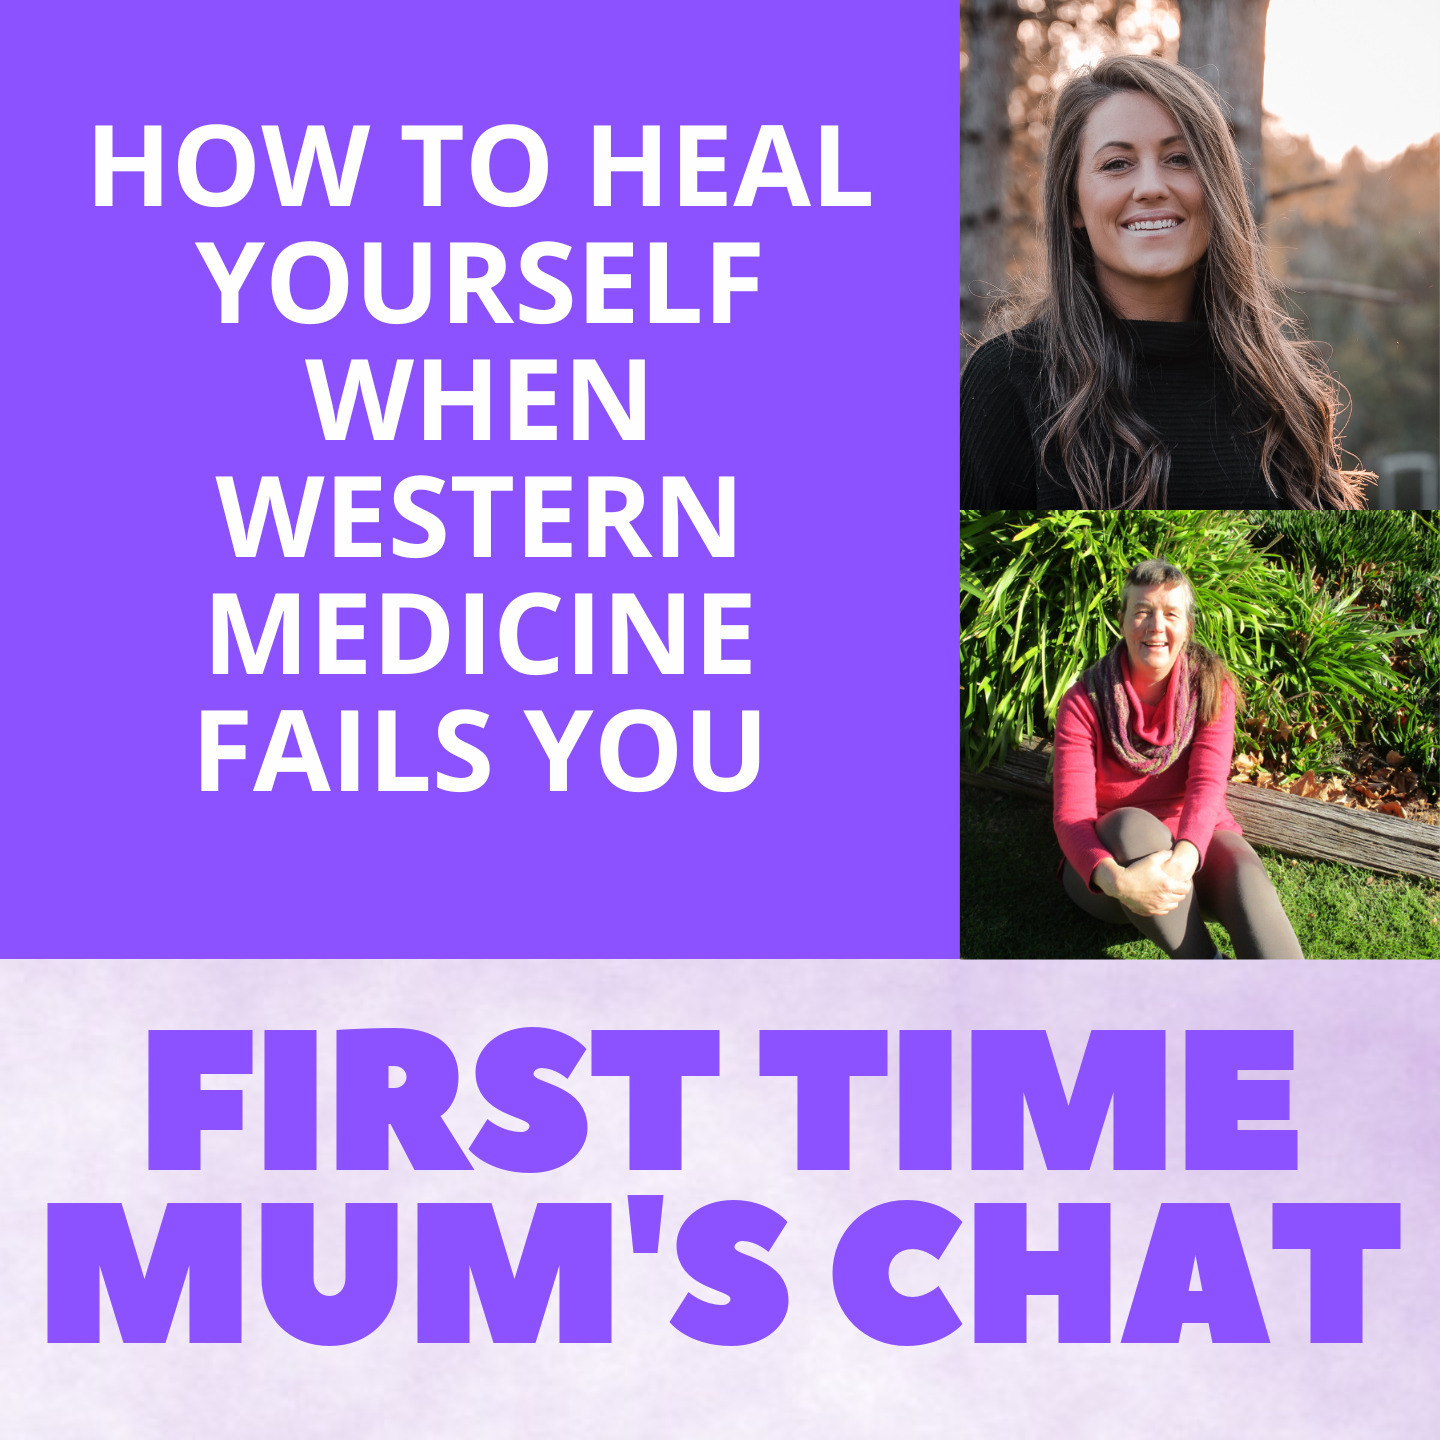 How to Heal Yourself When Western Medicine Fails You